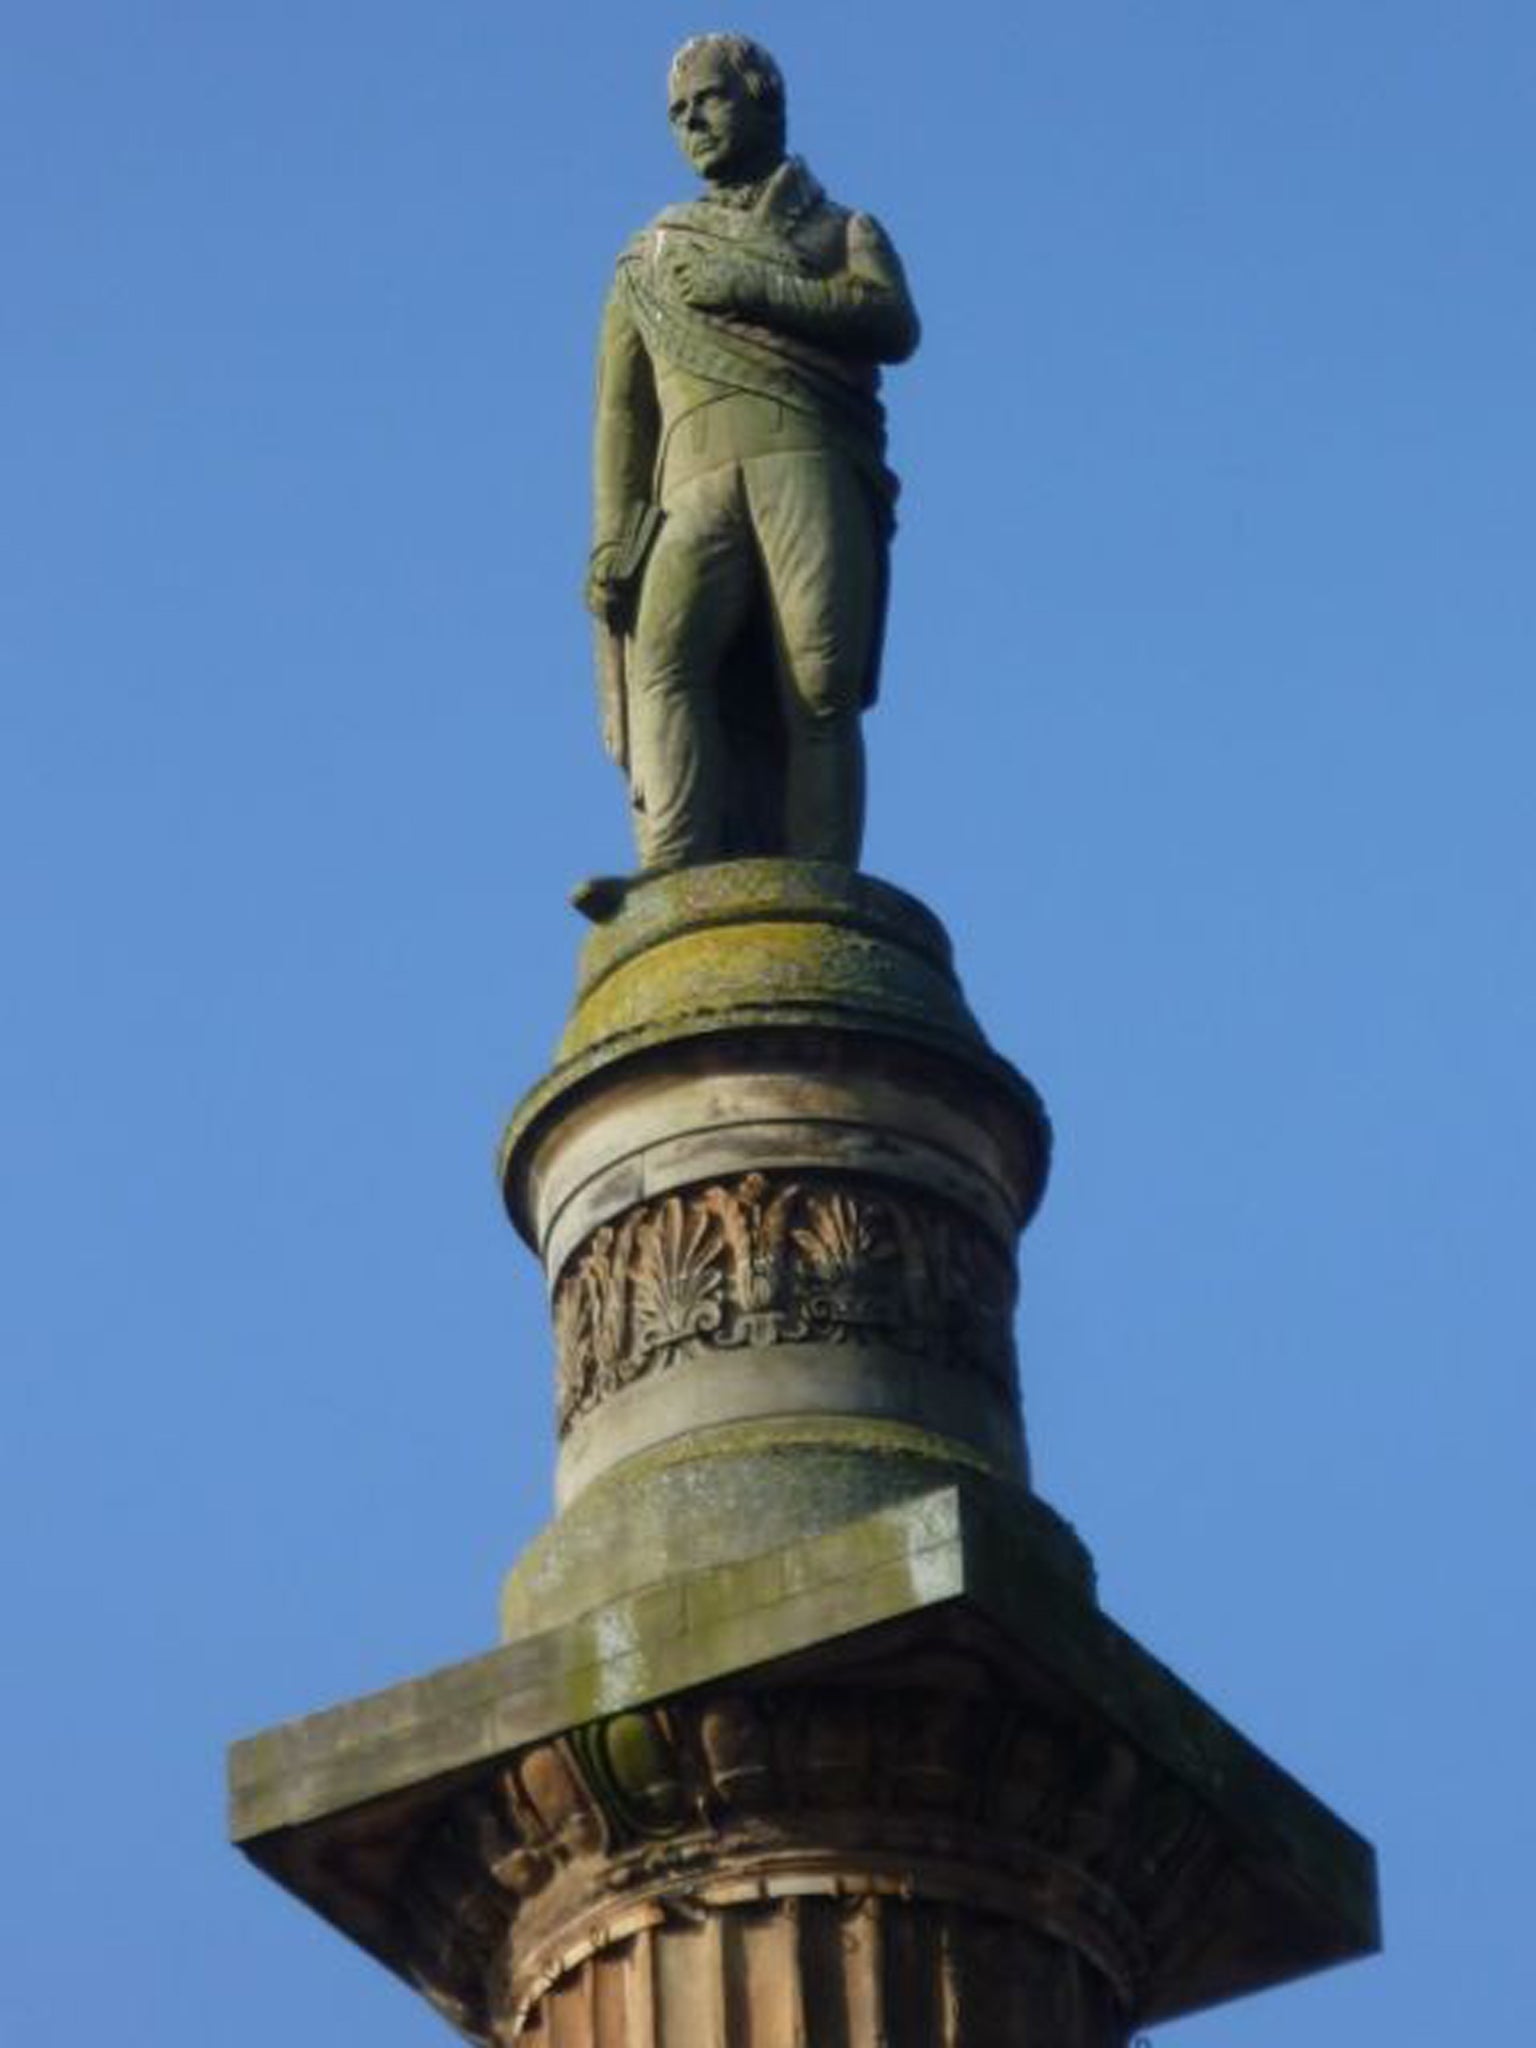 The monument of Walter Scott in Glasgow's George Square